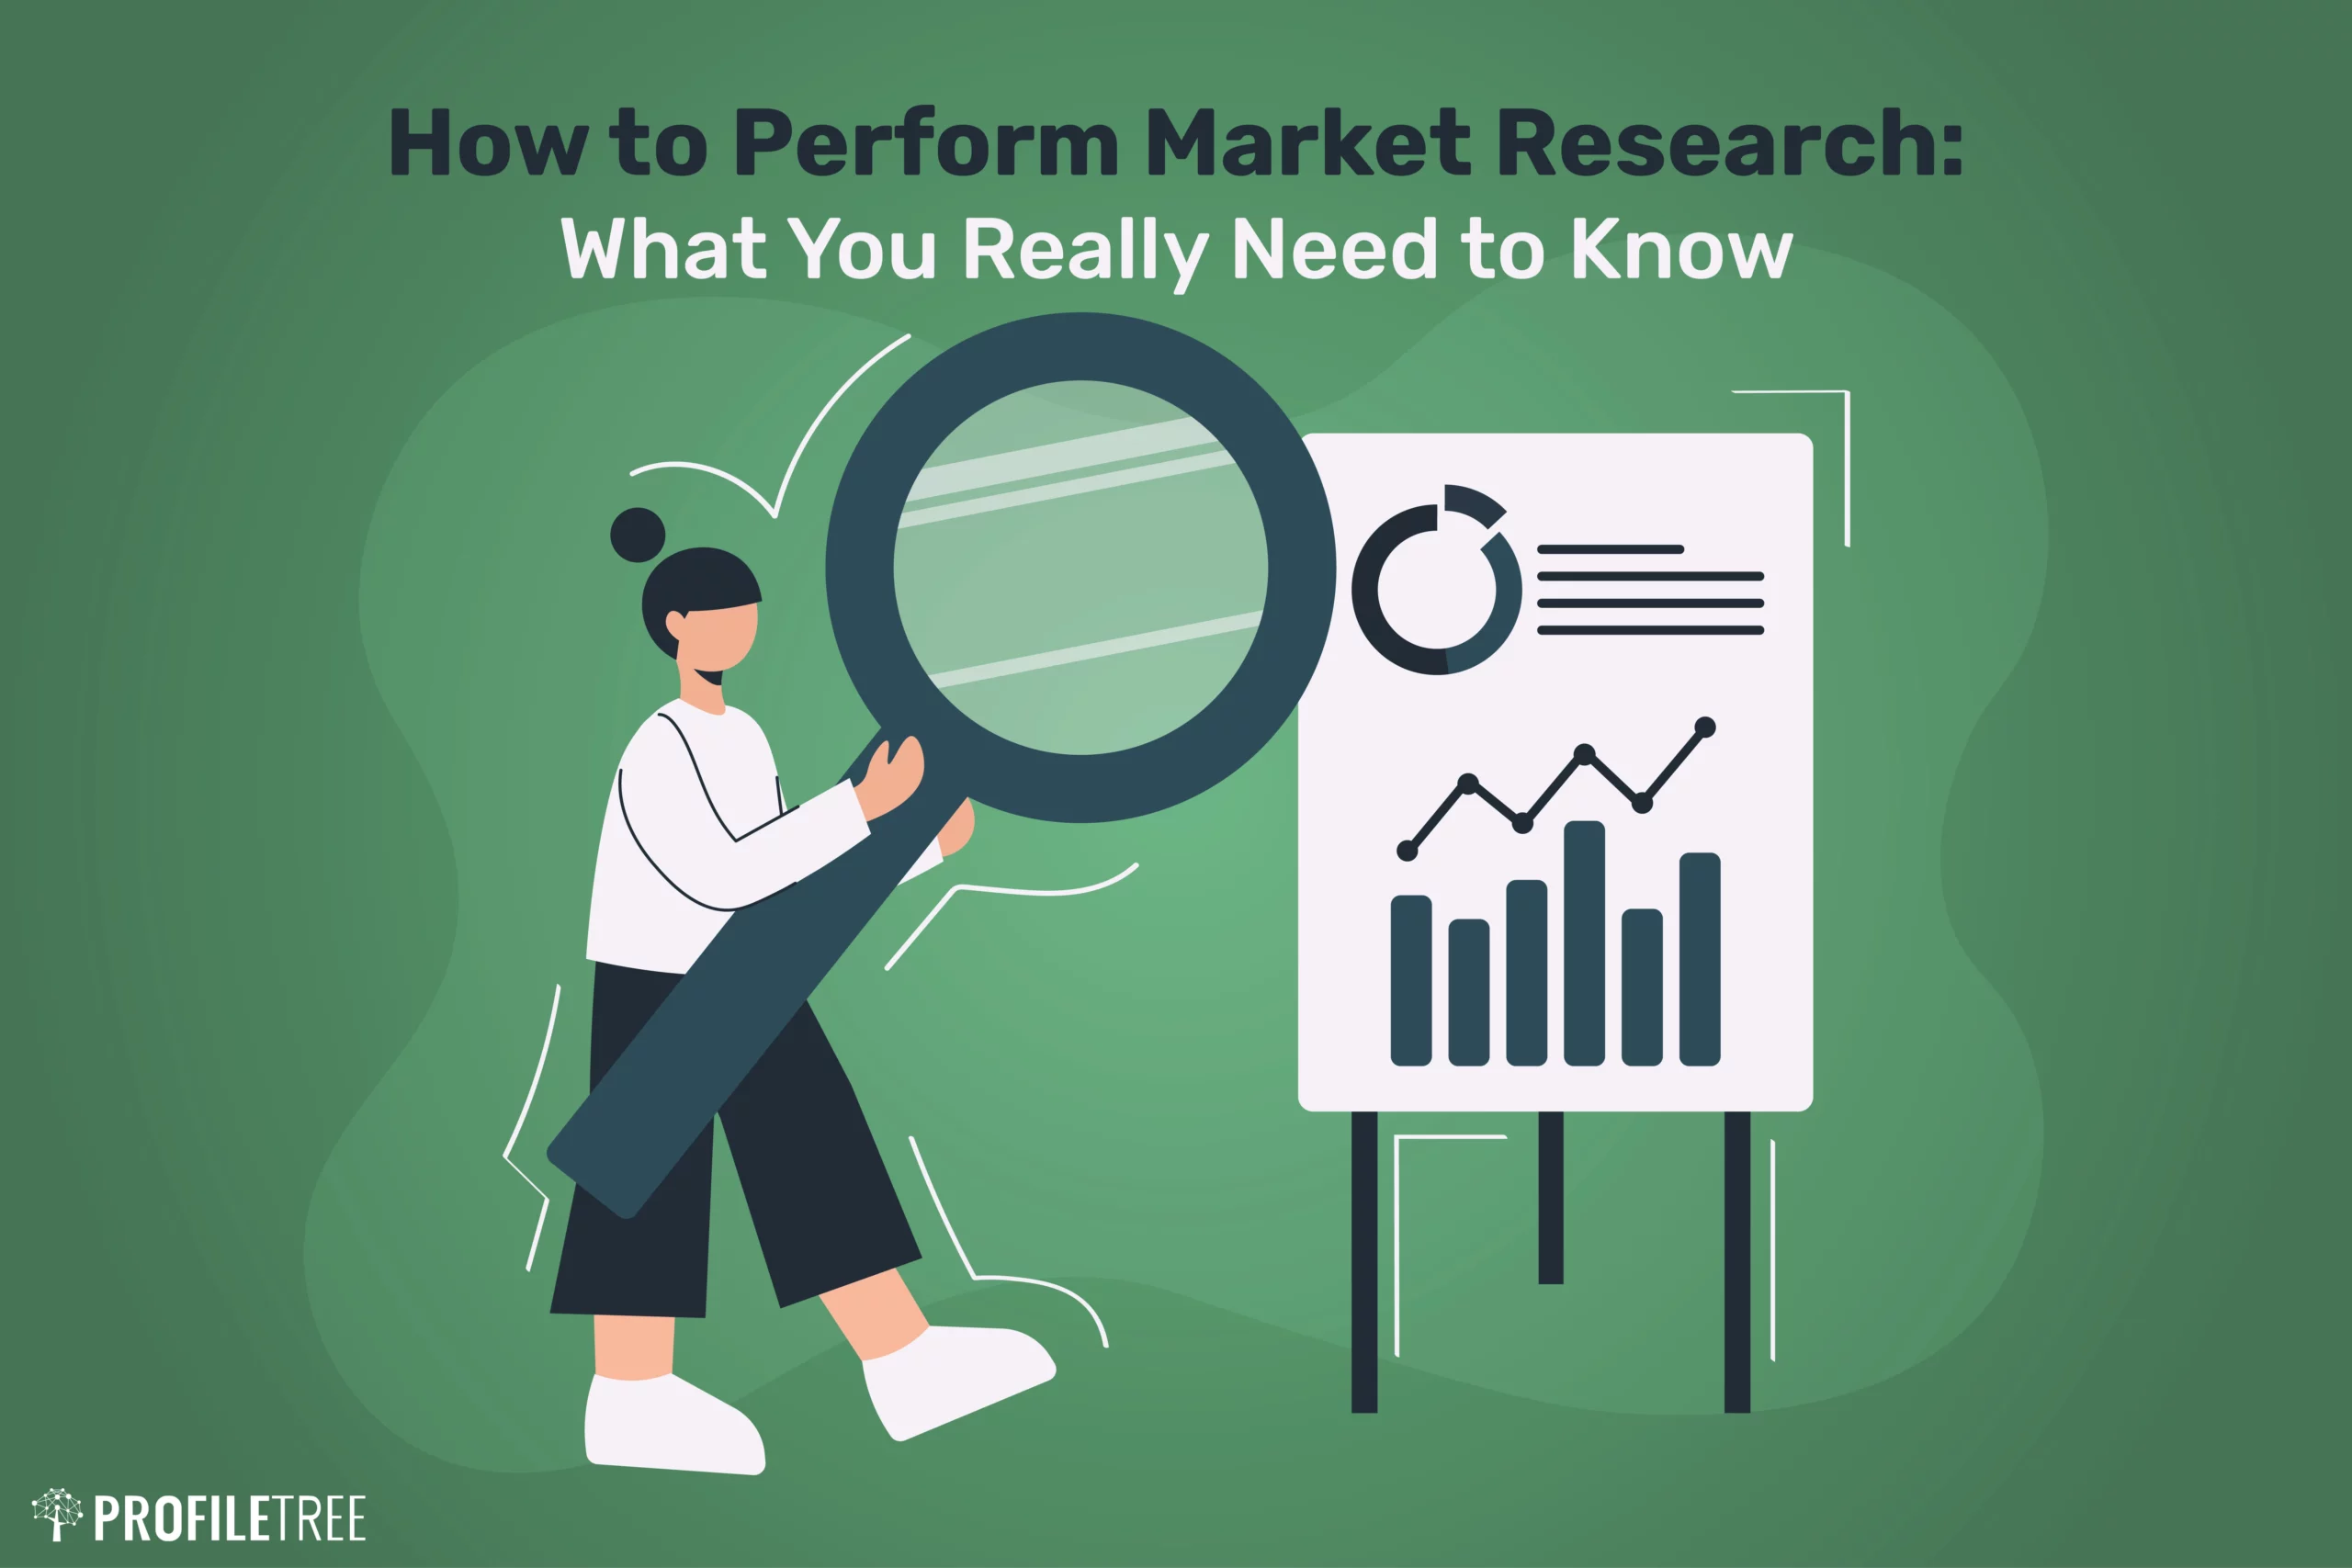 How to Perform Market Research What You Really Need to Know